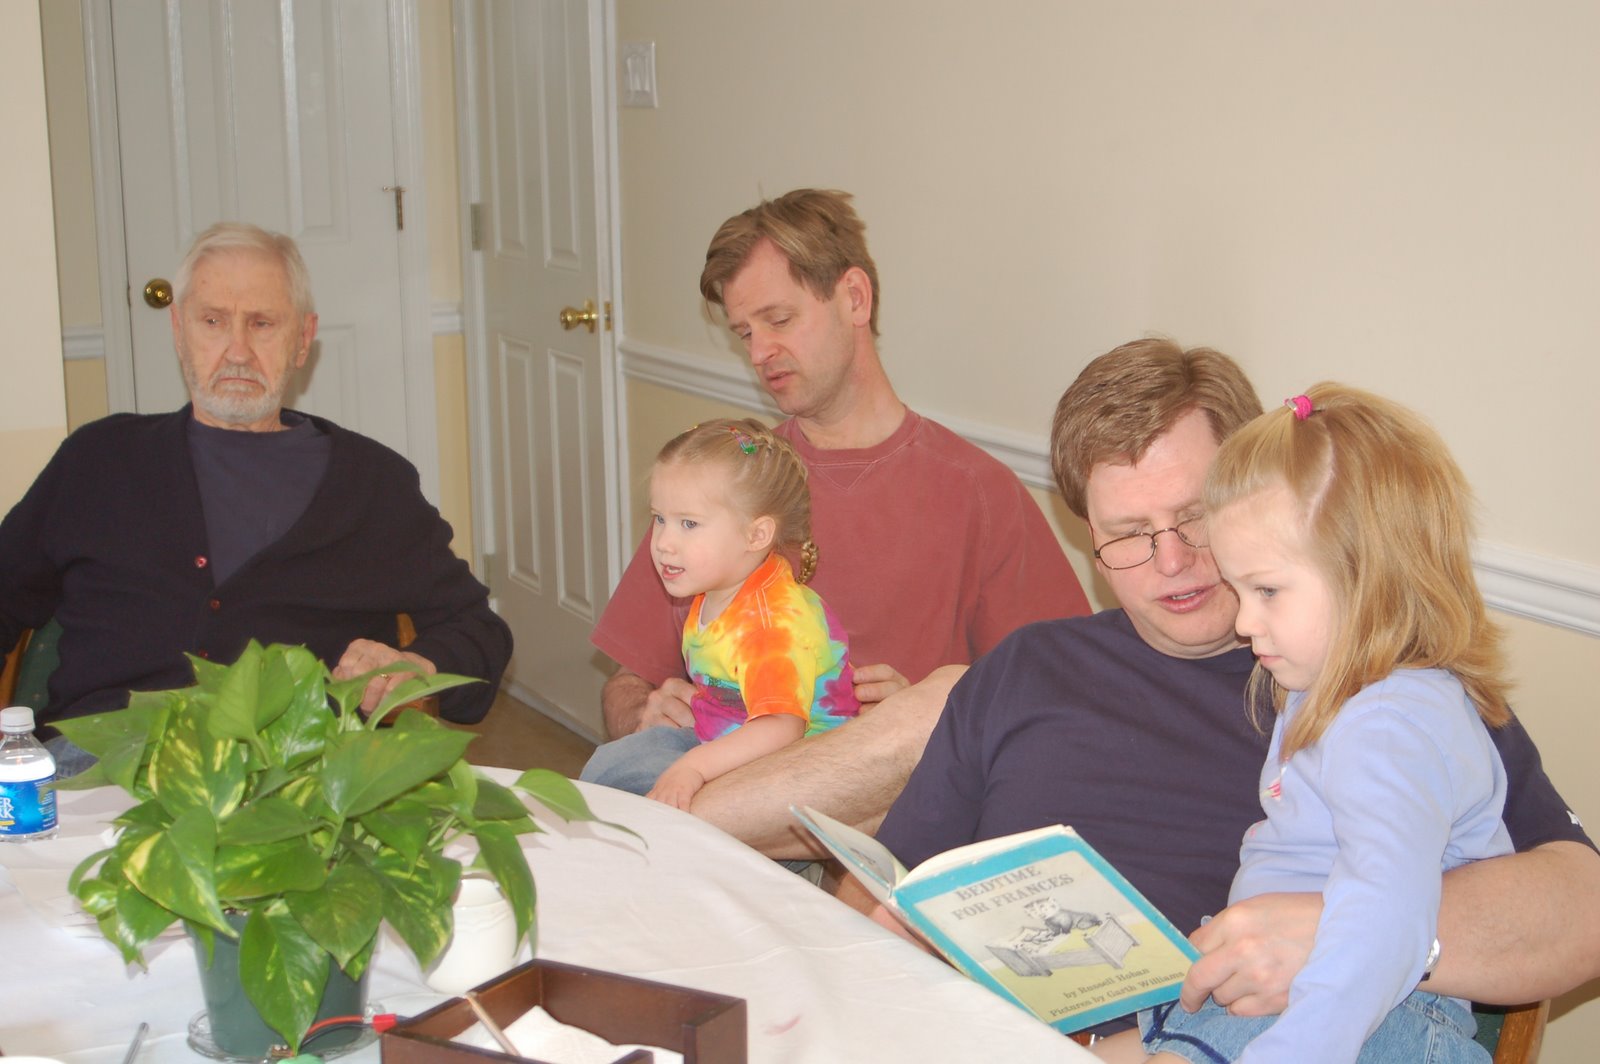 [Great+Grandpa+and+Great+Uncles.jpg]